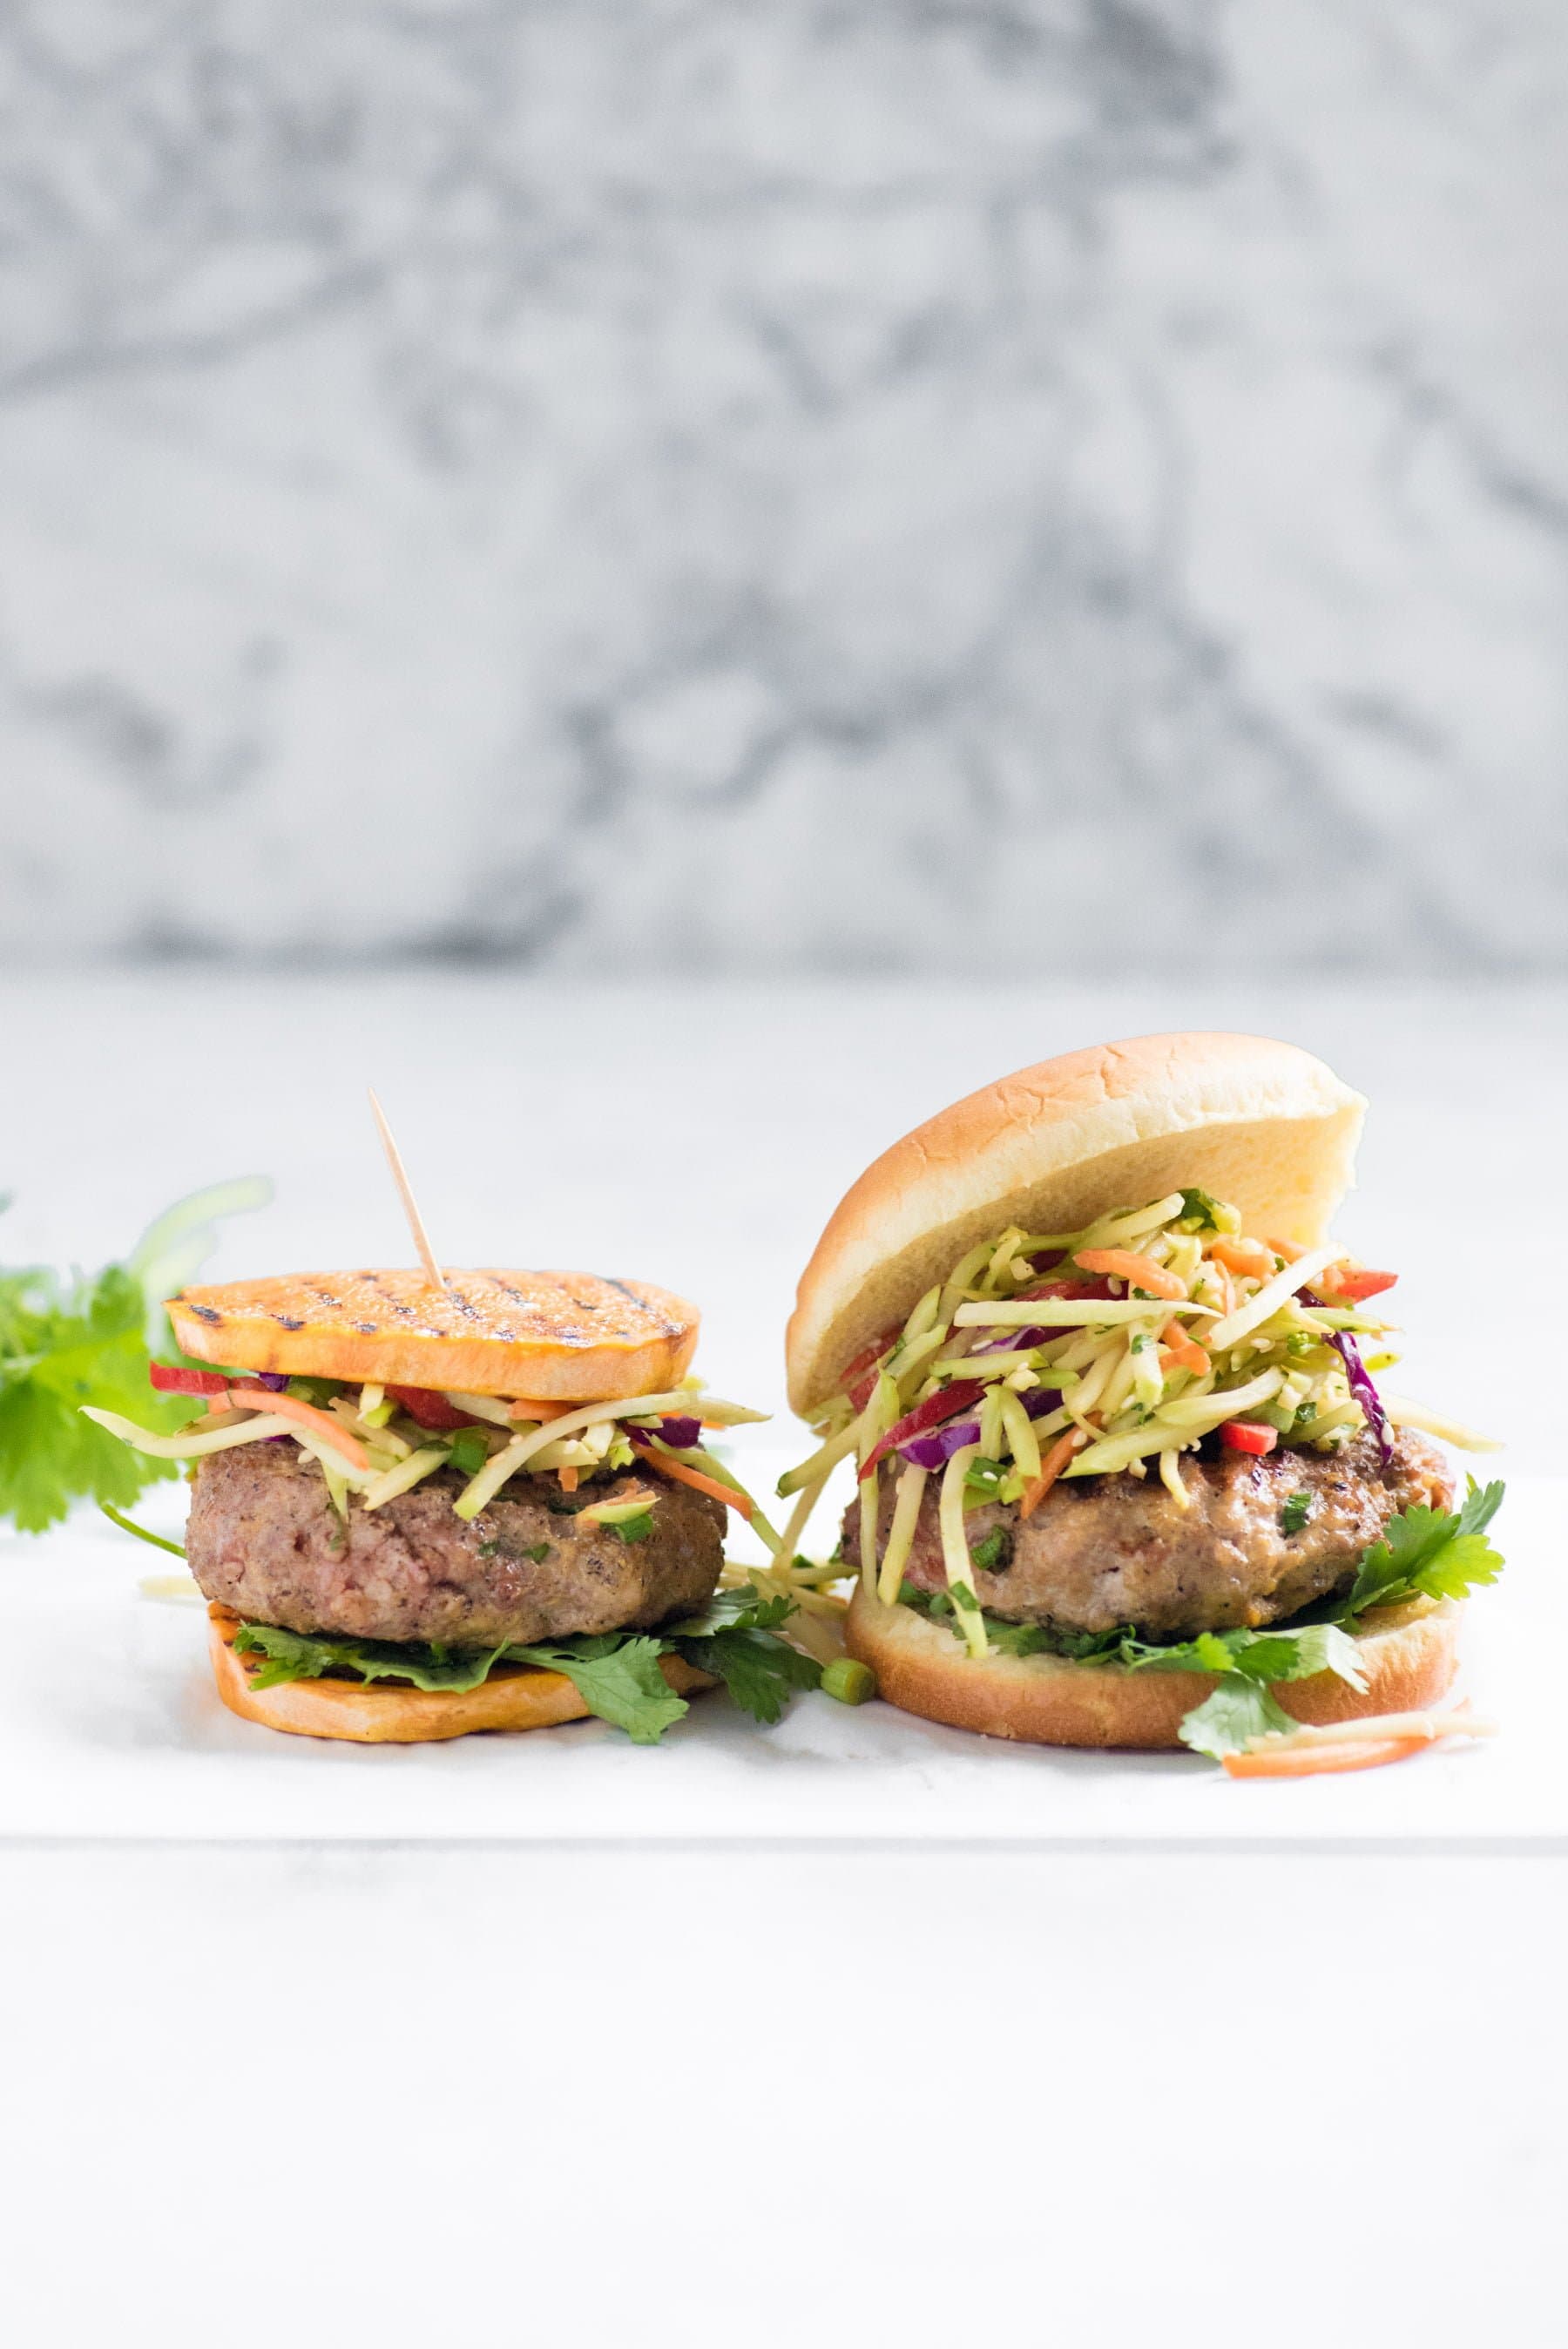 two Asian Pork Burgers with Broccoli Slaw - One on Sweet Potato Rounds, One on Bun